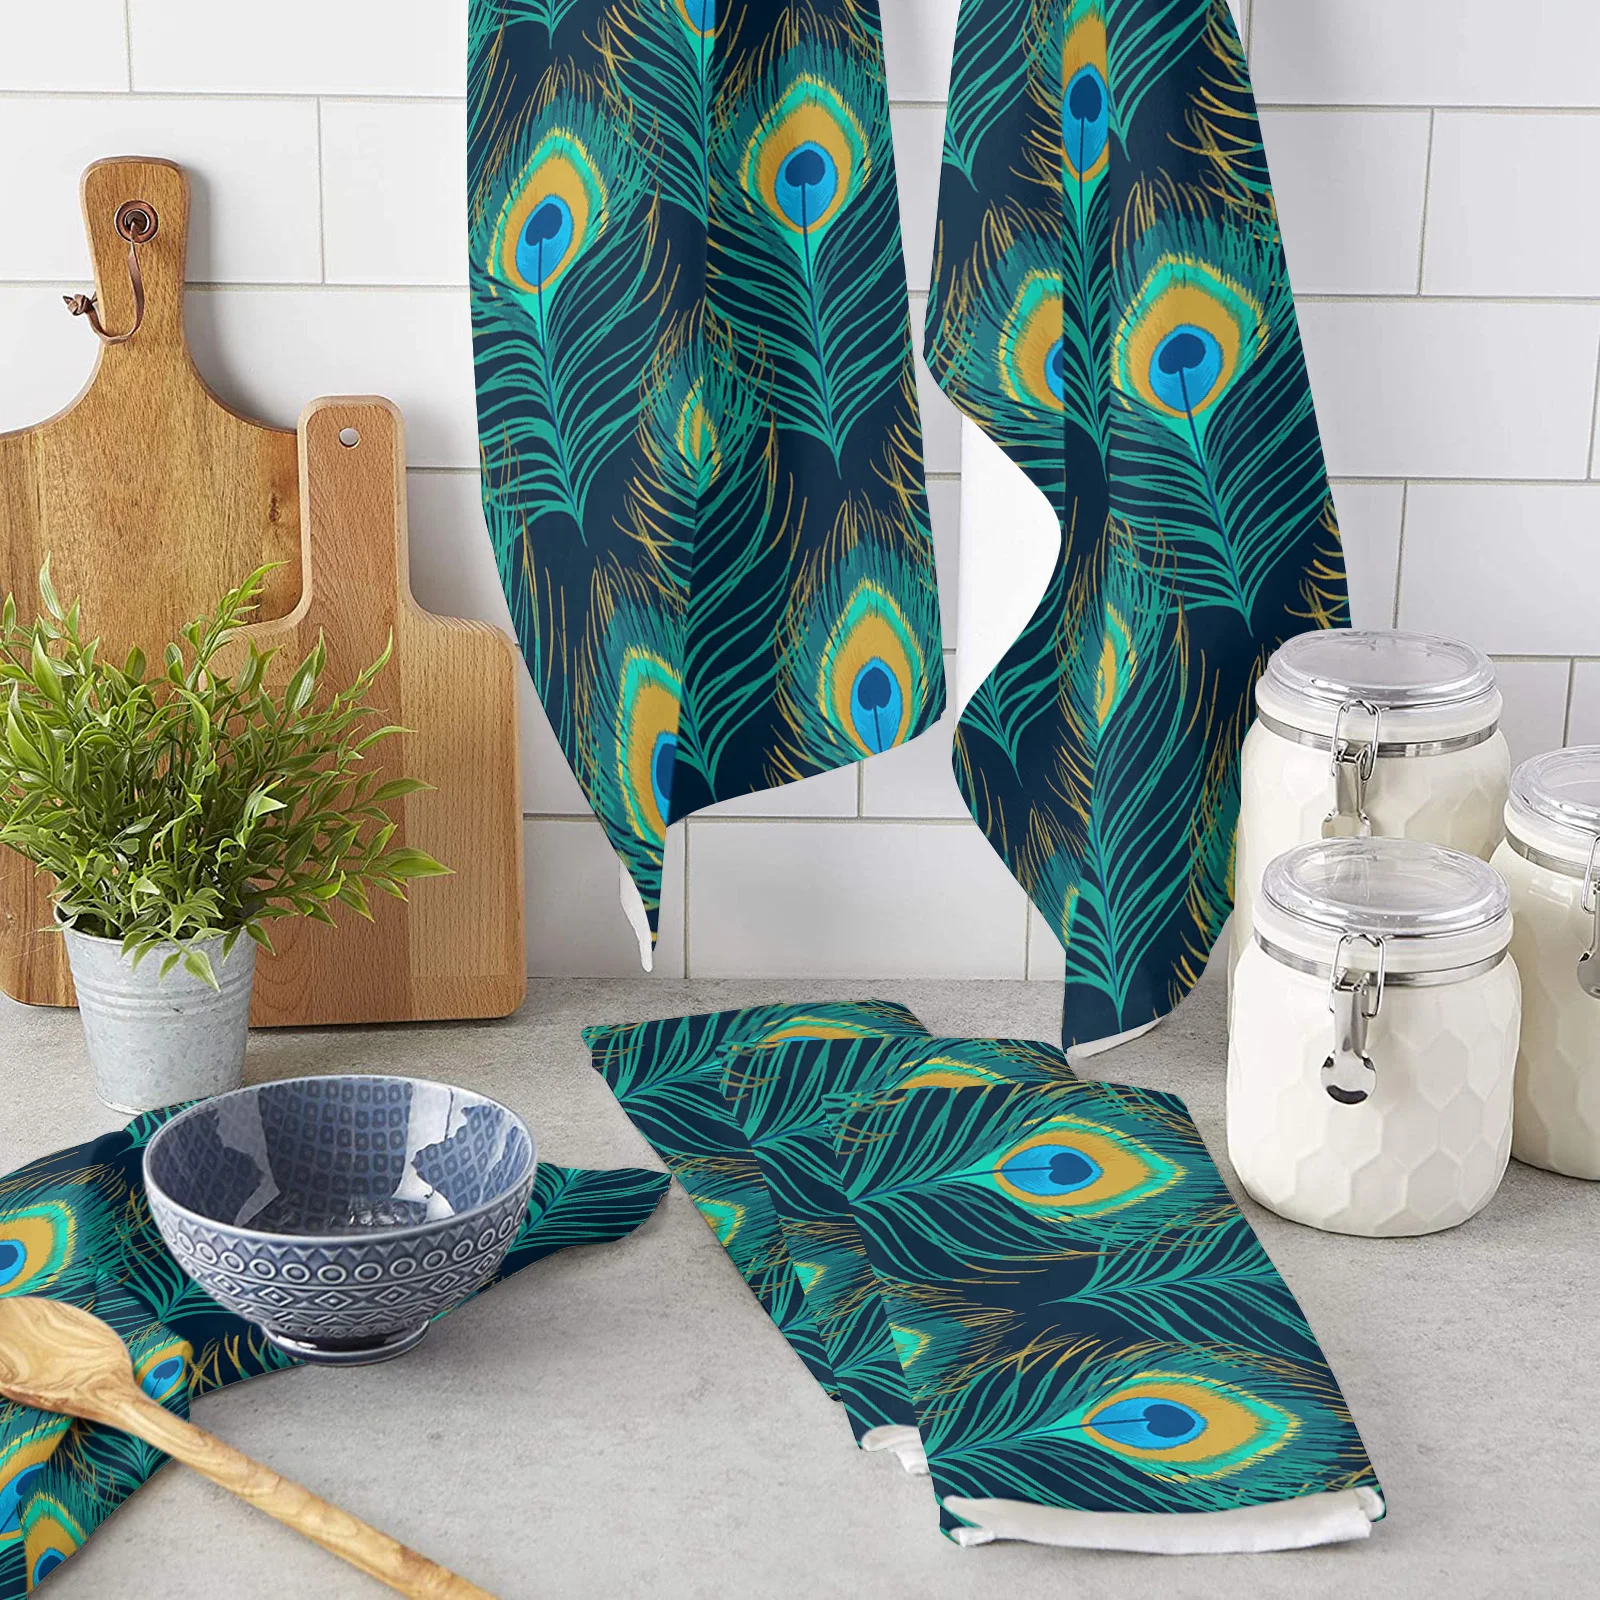 Peacock Feather Cyan Kitchen Towel Bathroom Hand Towel Kitchen Dishcloth Water Absorption Household Cleaning Cloth